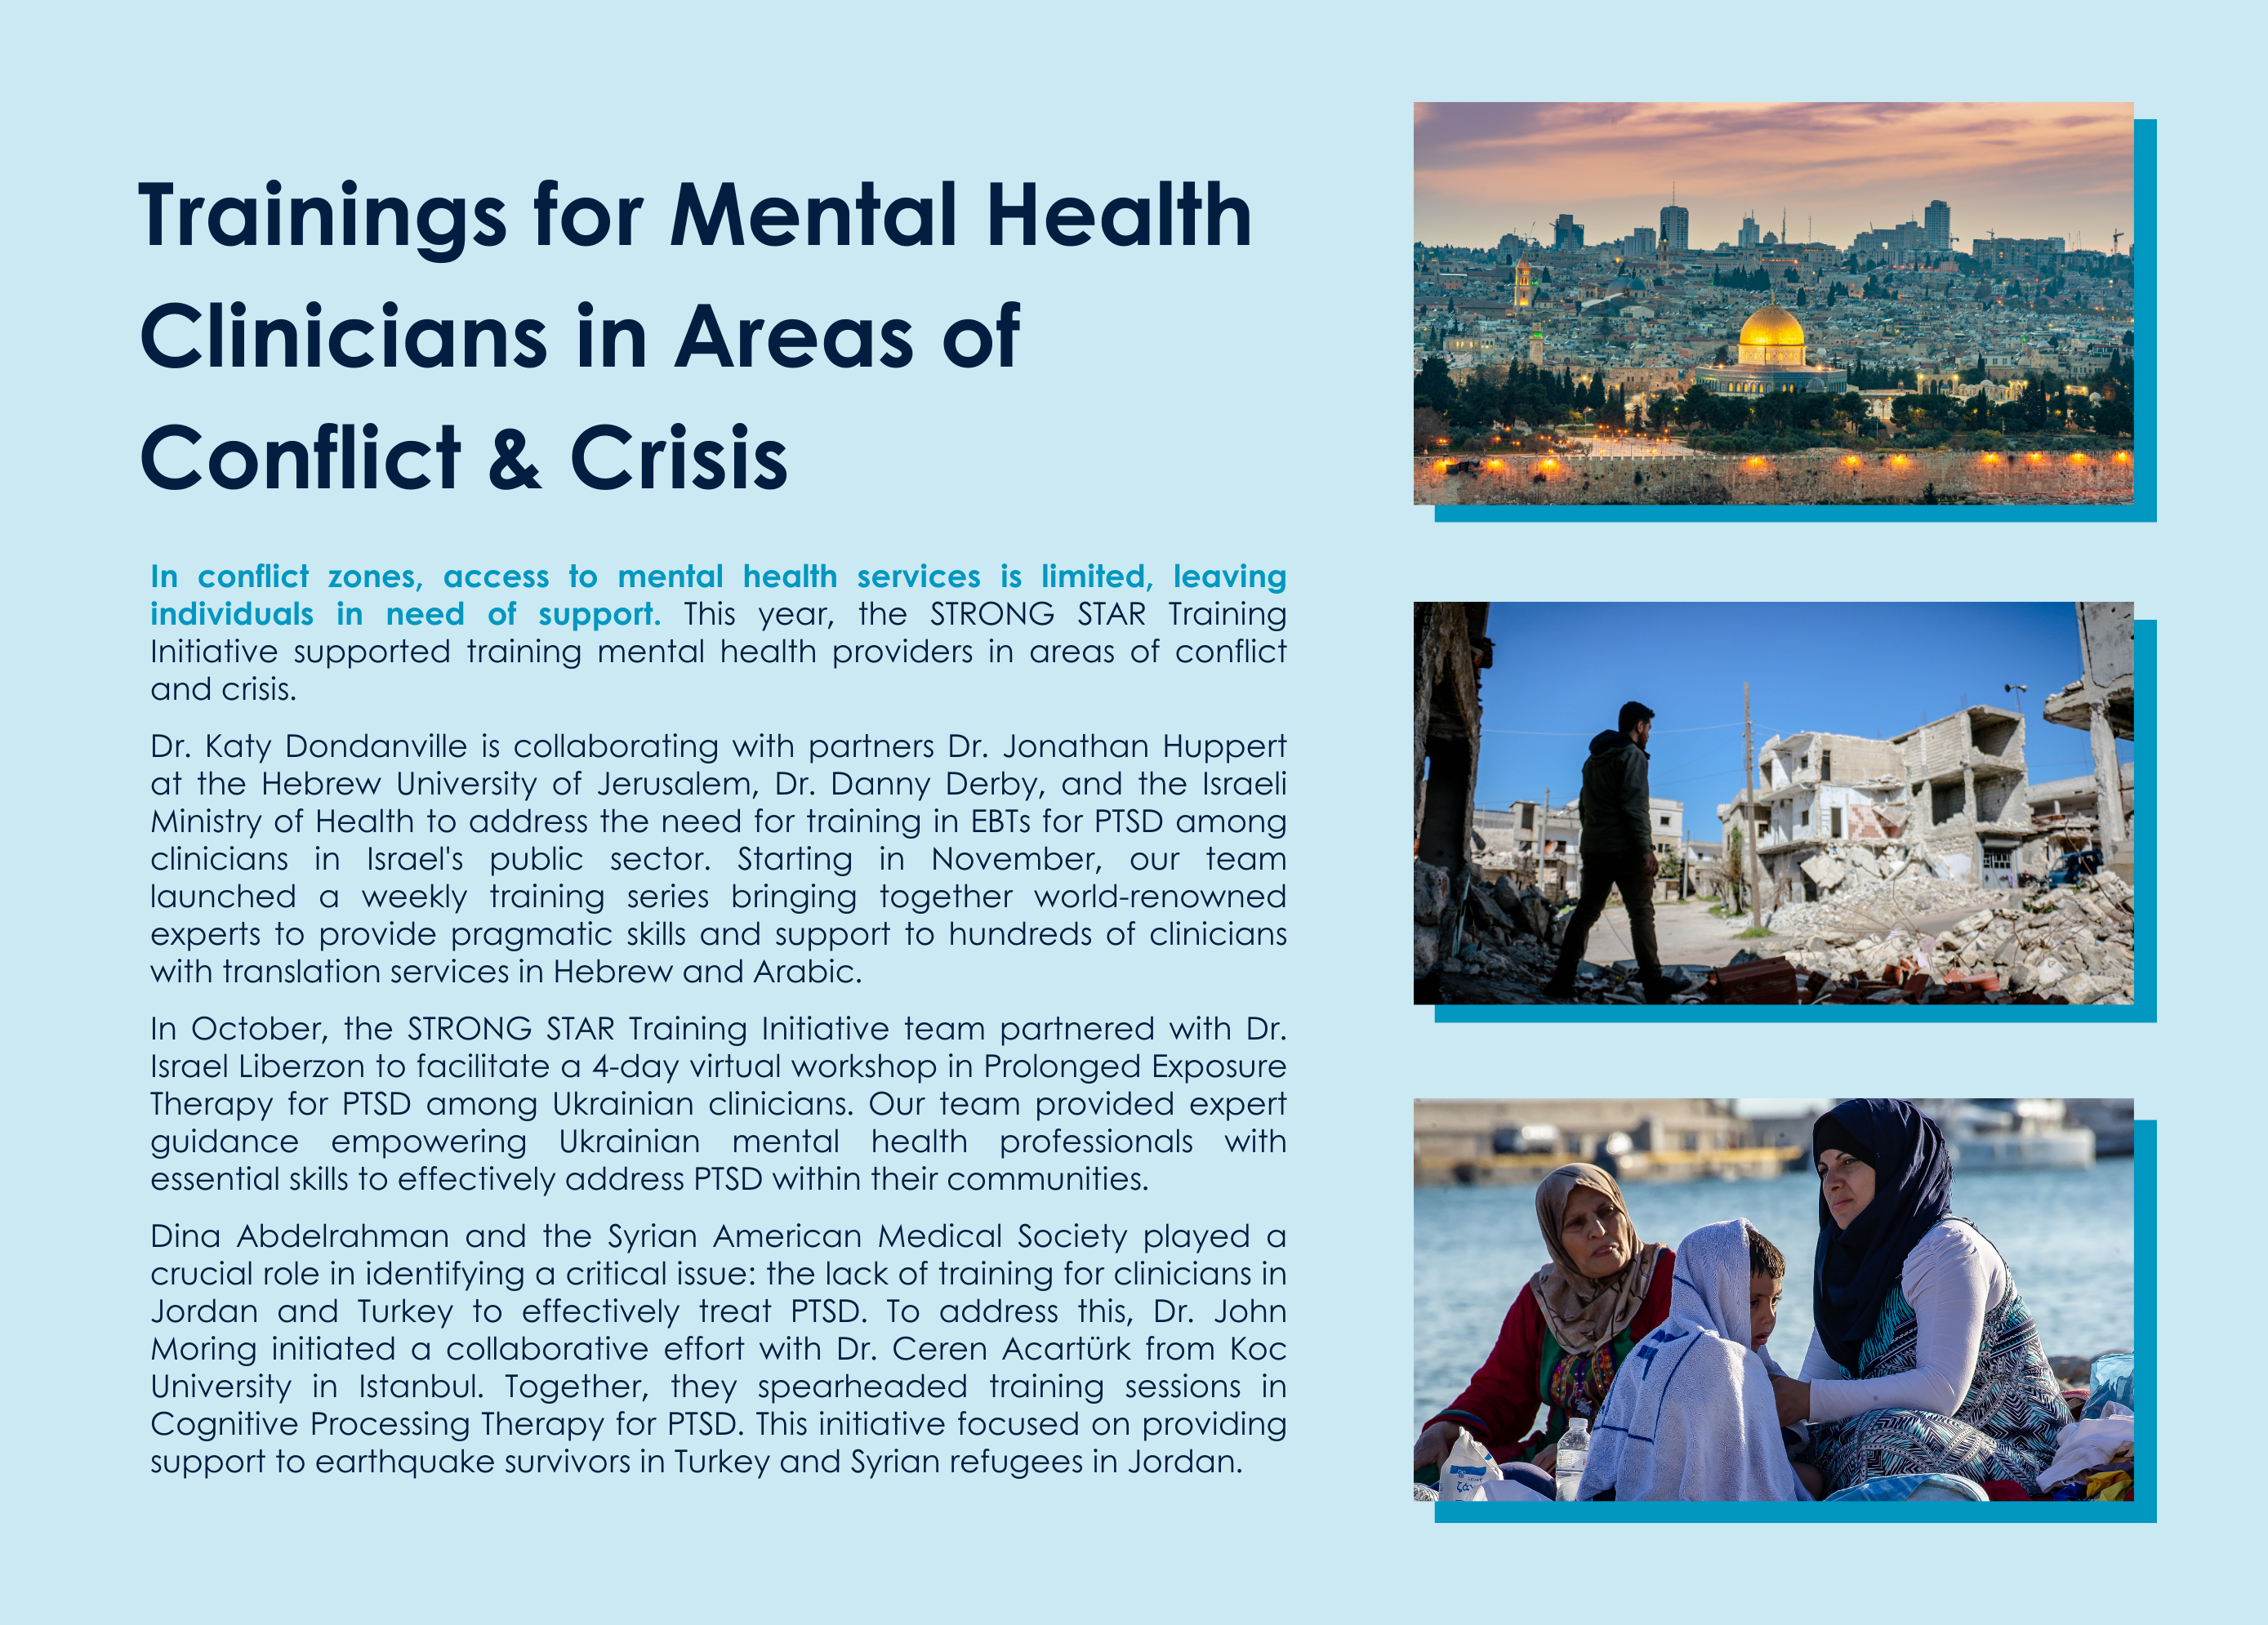 "Trainings for Mental Health Clinicians in Areas of Conflict and Crisis: In conflict zones, access to mental health services is limited, leaving individuals in need of support. This year, the STRONG STAR Training Initiative supported training mental health providers in areas of conflict and crisis. Dr. Katy Dondanville is collaborating with partners Dr. Jonathan Huppert at the Hebrew University of Jerusalem, Dr. Danny Derby, and the Israeli Ministry of Health to address the need for training in EBTs for PTSD among clinicians in Israel's public sector. Starting in November, our team launched a weekly training series bringing together world-renowned experts to provide pragmatic skills and support to hundreds of clinicians with translation services in Hebrew and Arabic. In October, the STRONG STAR Training Initiative team partnered with Dr. Israel Liberzon to facilitate a 4-day virtual workshop in Prolonged Exposure Therapy for PTSD among Ukrainian clinicians. Our team provided expert guidance empowering Ukrainian mental health professionals with essential skills to effectively address PTSD within their communities. Dina Abdelrahman and the Syrian American Medical Society played a crucial role in identifying a critical issue: the lack of training for clinicians in Jordan and Turkey to effectively treat PTSD. To address this, Dr. John Moring initiated a collaborative effort with Dr. Ceren Acartürk from Koc University in Istanbul. Together, they spearheaded training sessions in Cognitive Processing Therapy for PTSD. This initiative focused on providing support to earthquake survivors in Turkey and Syrian refugees in Jordan." images on the right-hand side depicting (1) dome of the rock, jerusalem, israel (2) a person stands in the rubble of a destroyed building (3) two individuals in hijabs and a child sitting on the beach